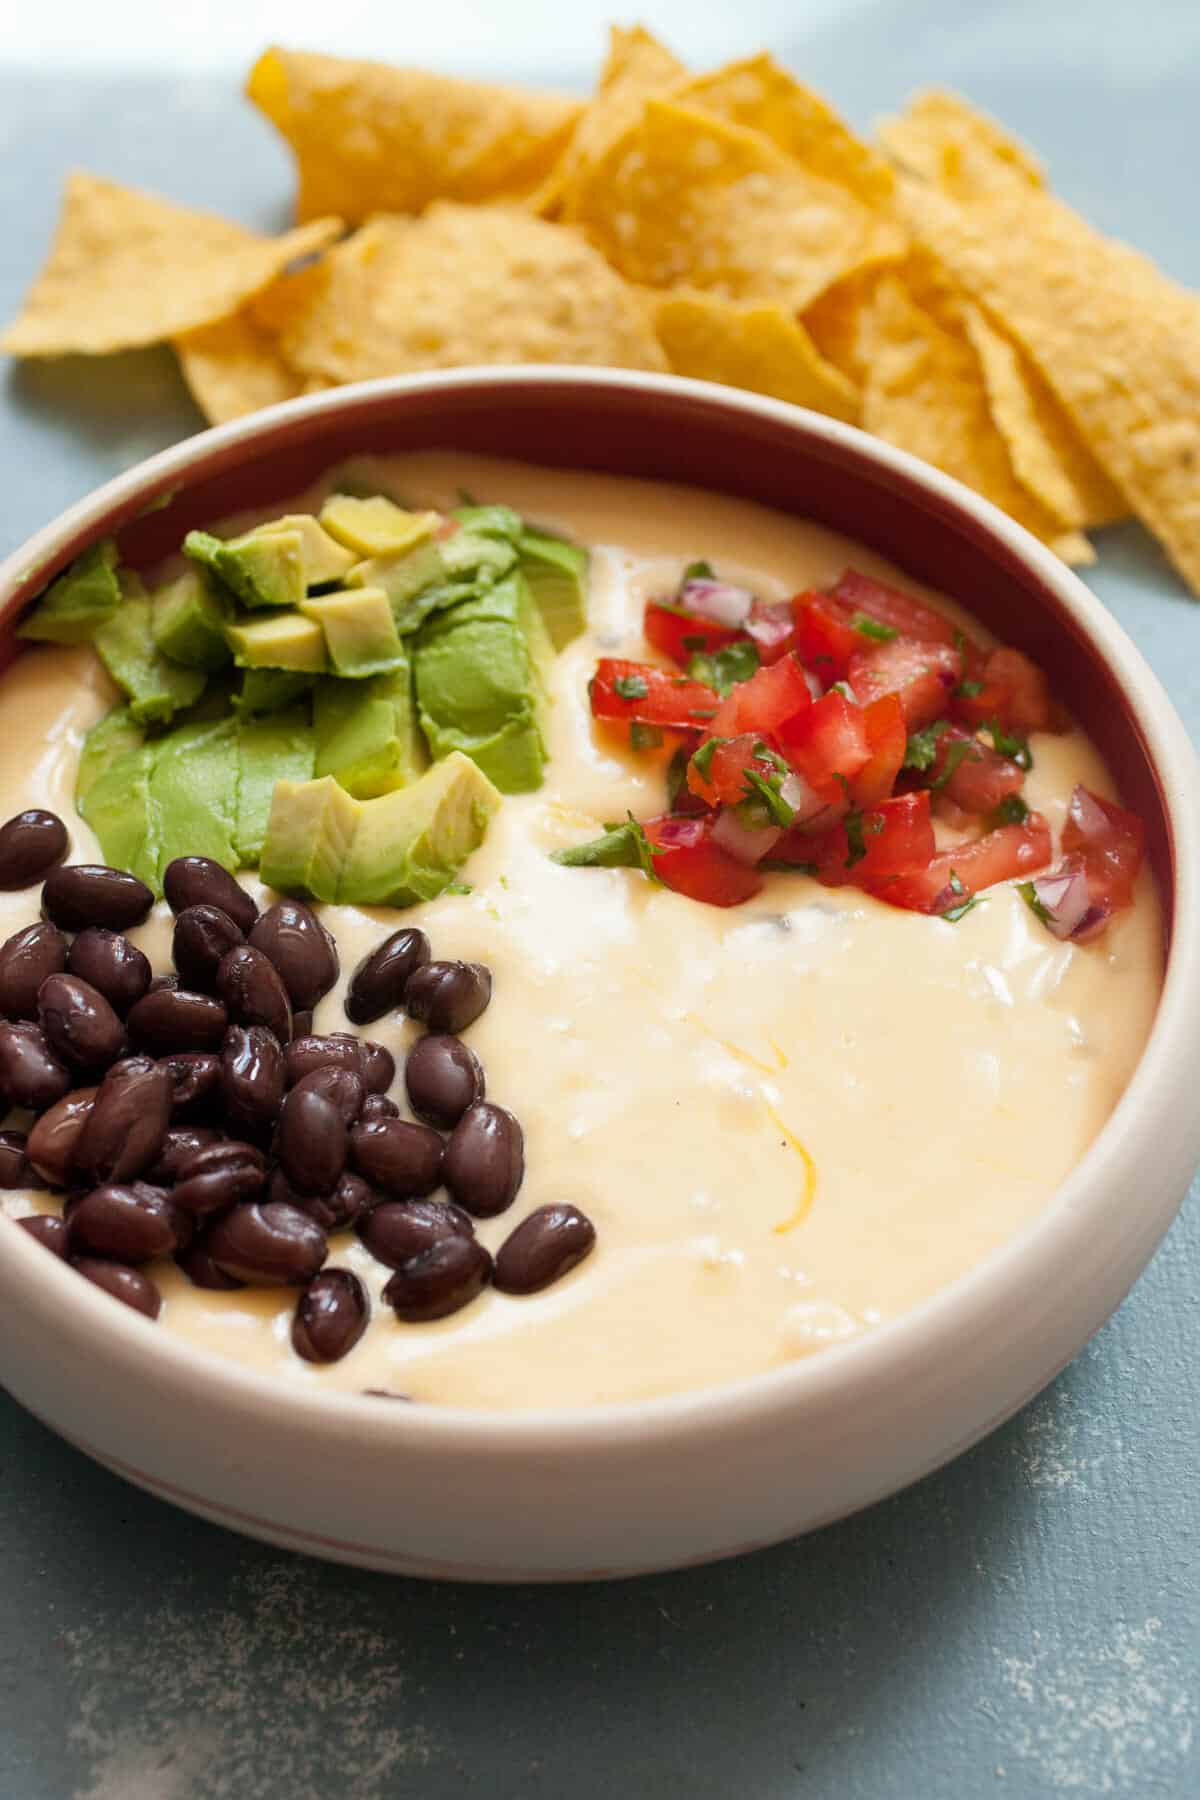 Macheesmo Mud Queso: This queso is jam-packed with add-ins and when you stir it all together you end up with "mud". Something that is very delicious on chips. You'll see. | macheesmo.com